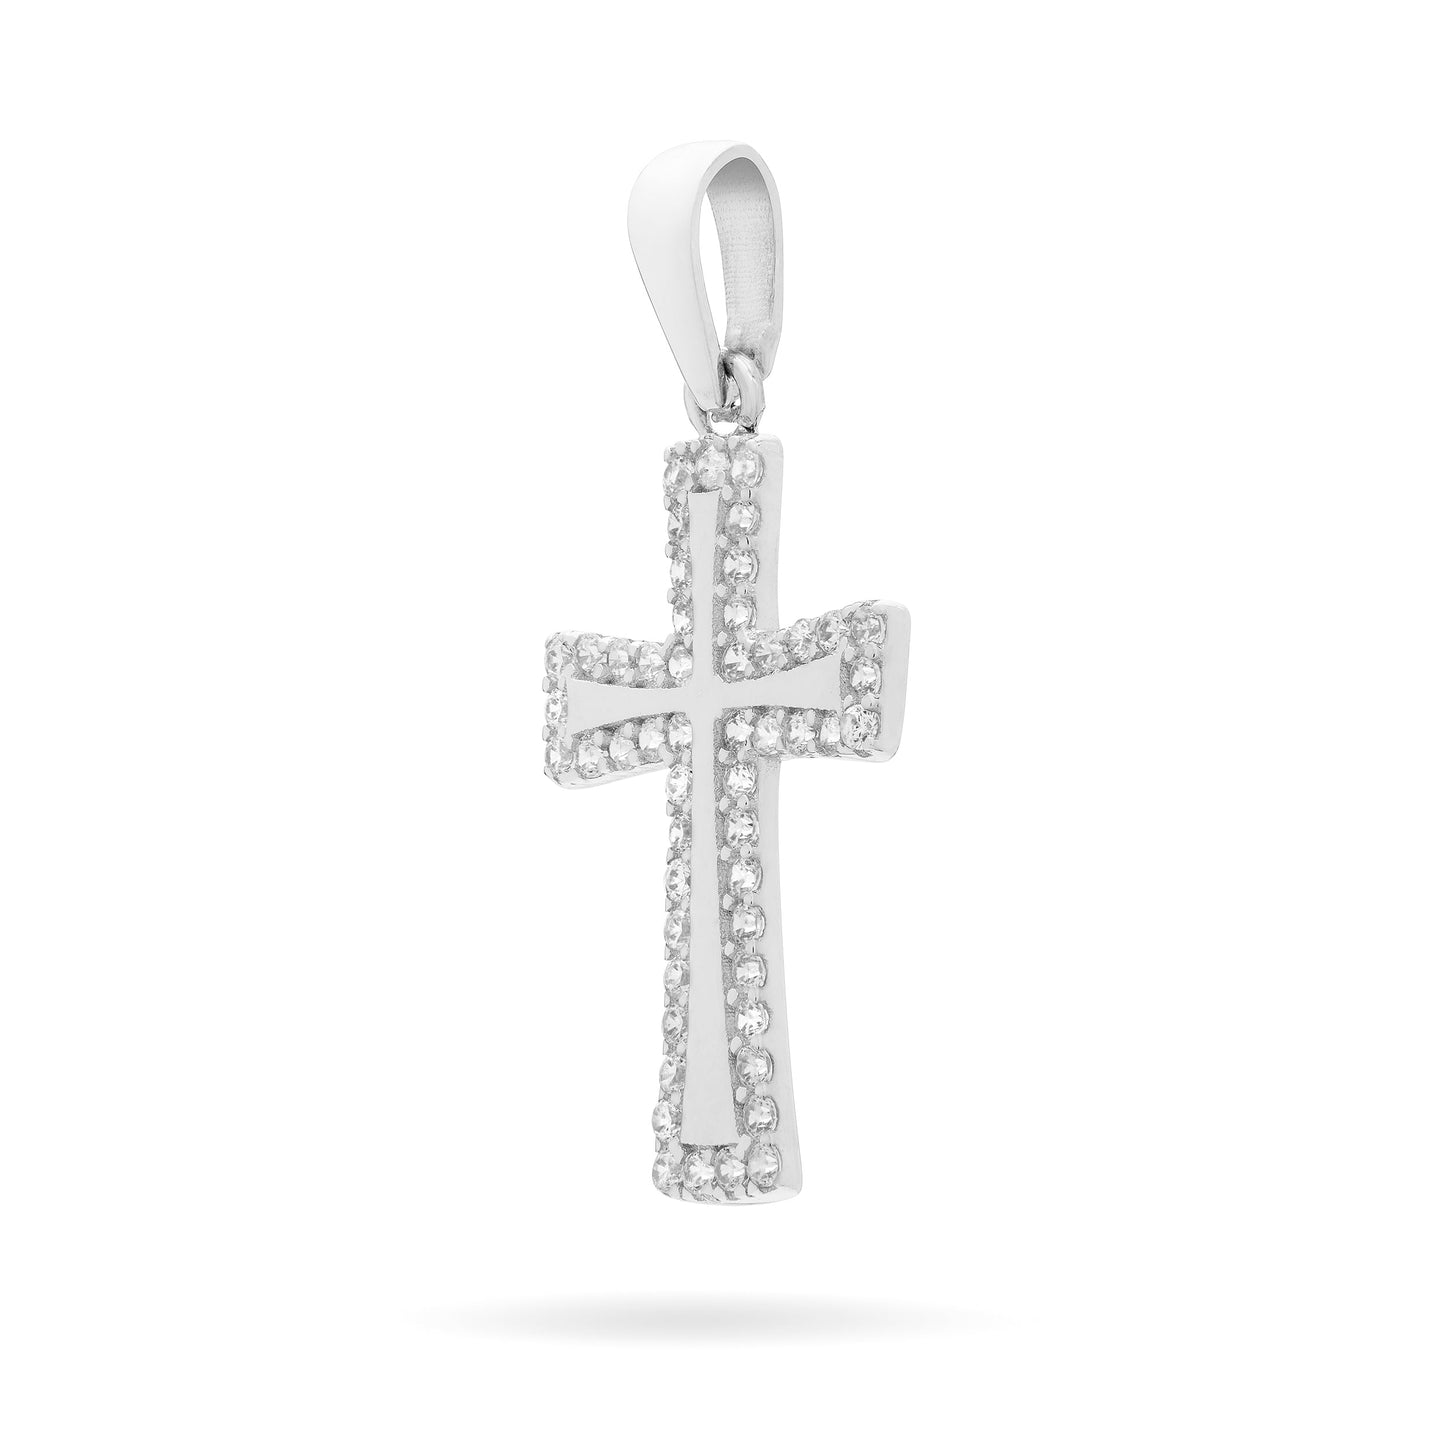 Mondo Cattolico Pendant 21 mm (0.83 in) White Gold Cross Pendant With Cubic Zirconia on the Outline